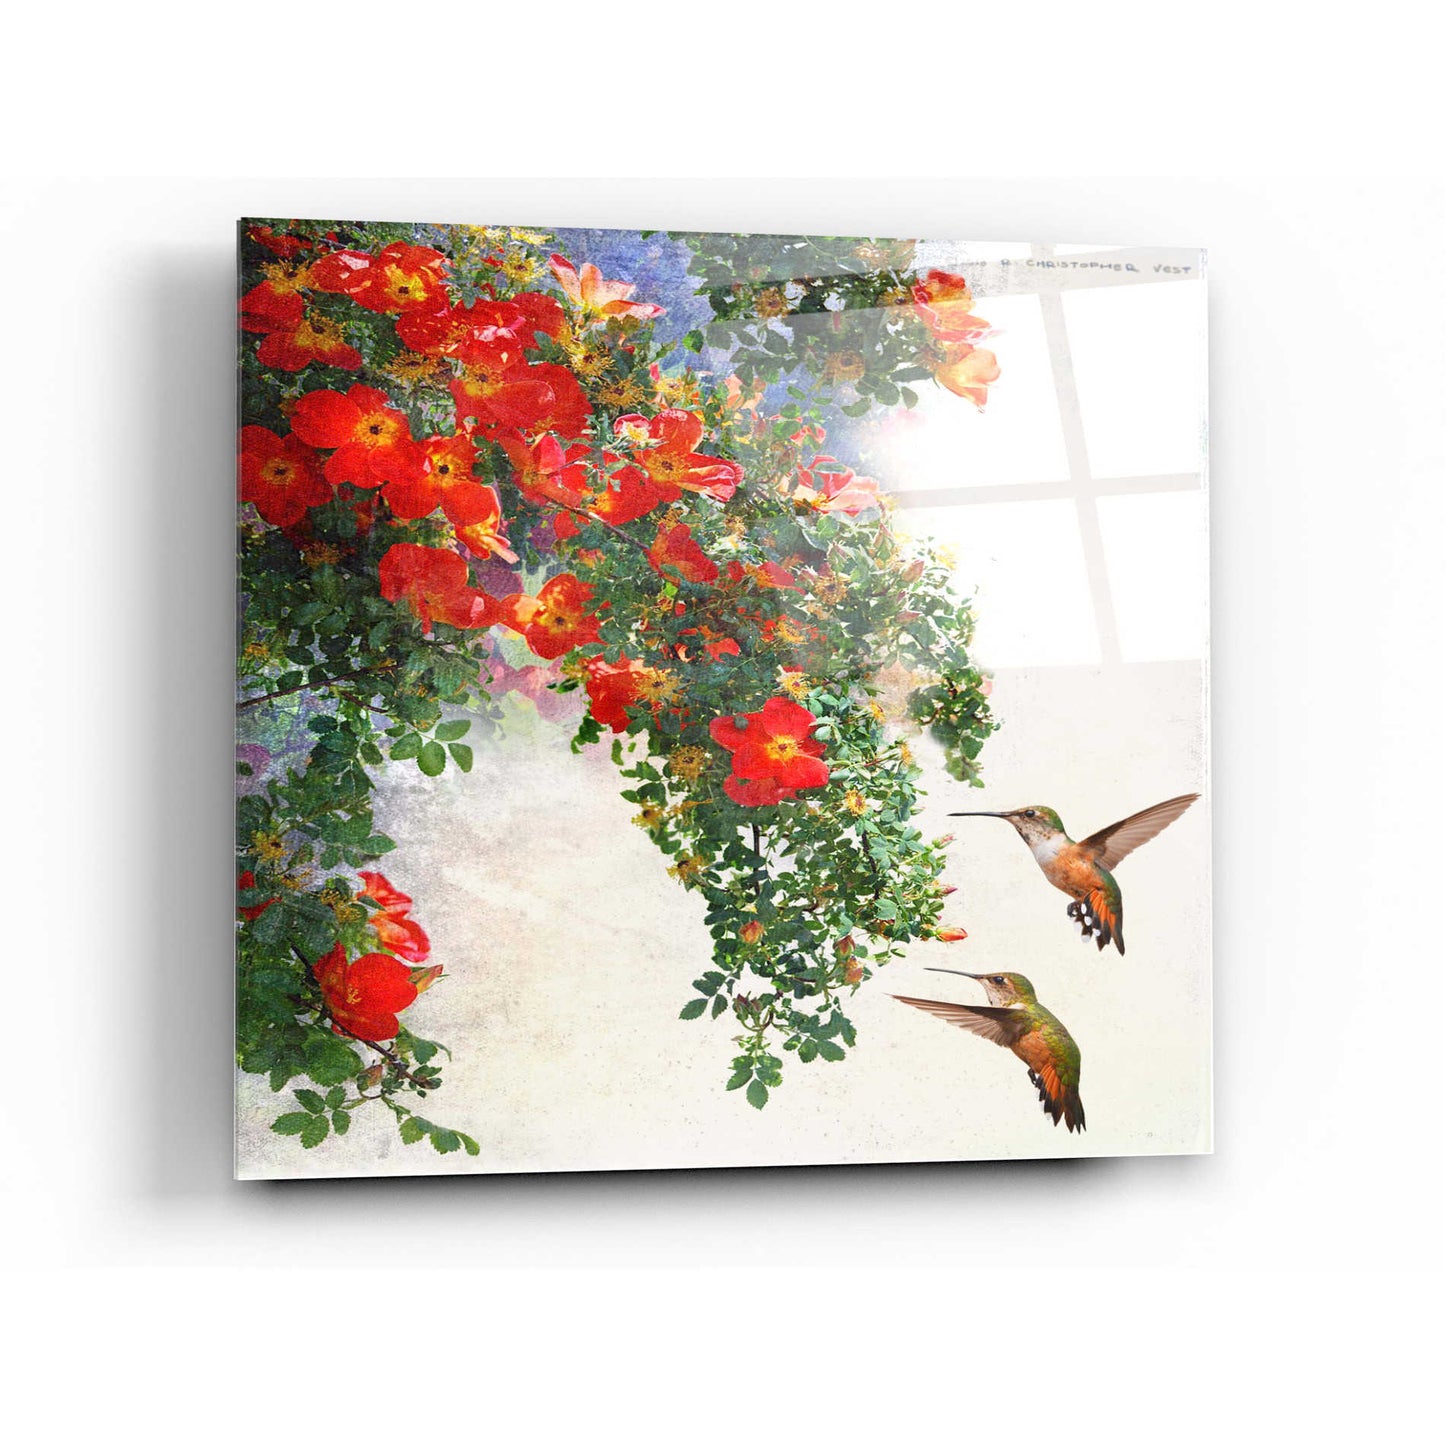 Epic Art 'Hanging Red Roses and Hummers' by Chris Vest, Acrylic Glass Wall Art,12x12